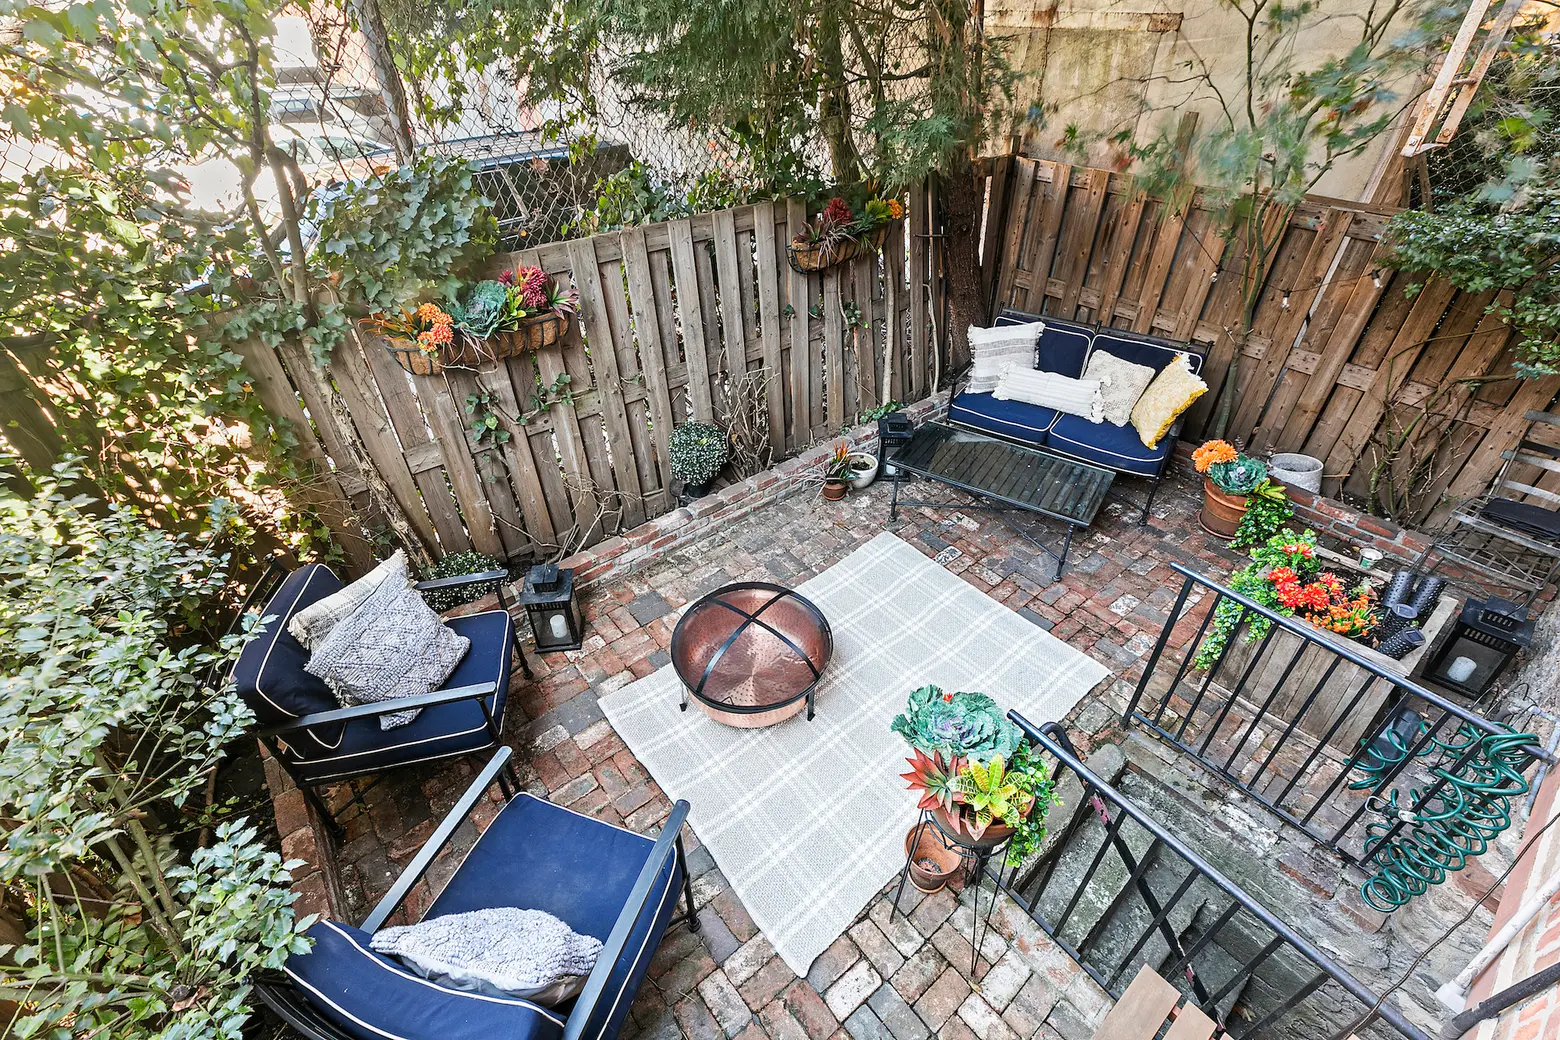 For $1M, this tidy West Village railroad pad is cute as pie and has a private back patio